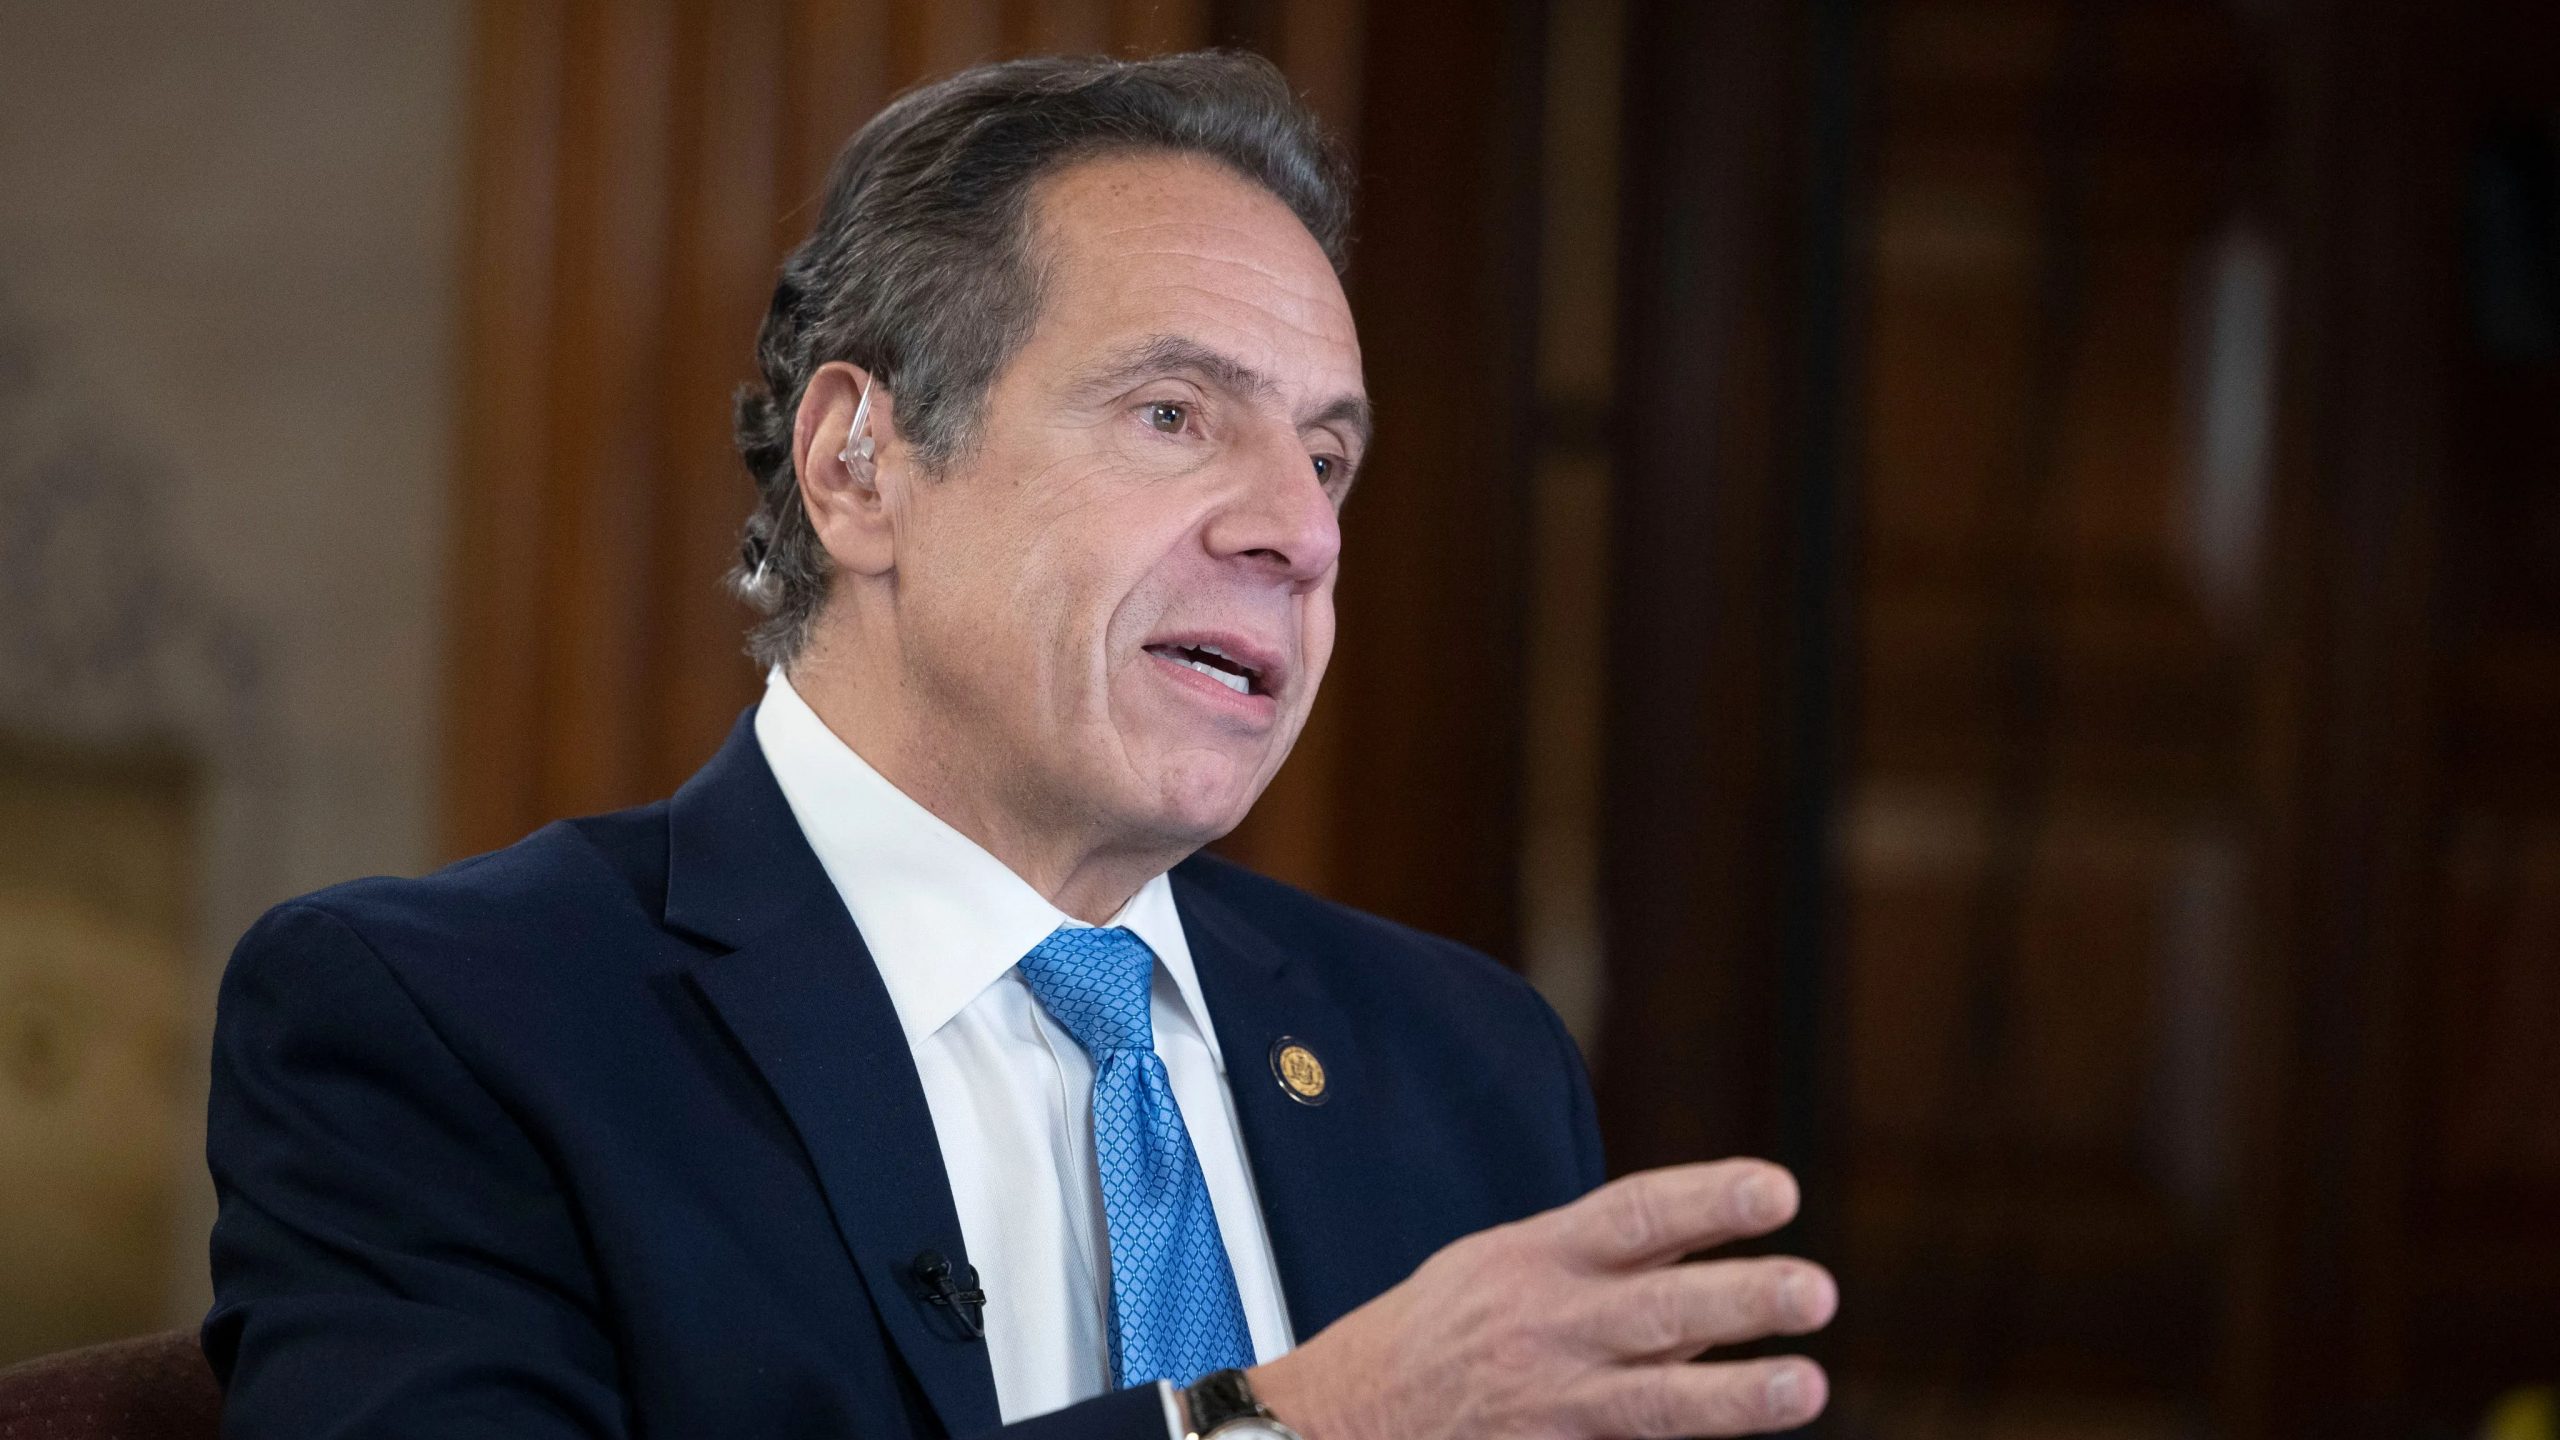 Whats next for outgoing New York Governor Andrew Cuomo?